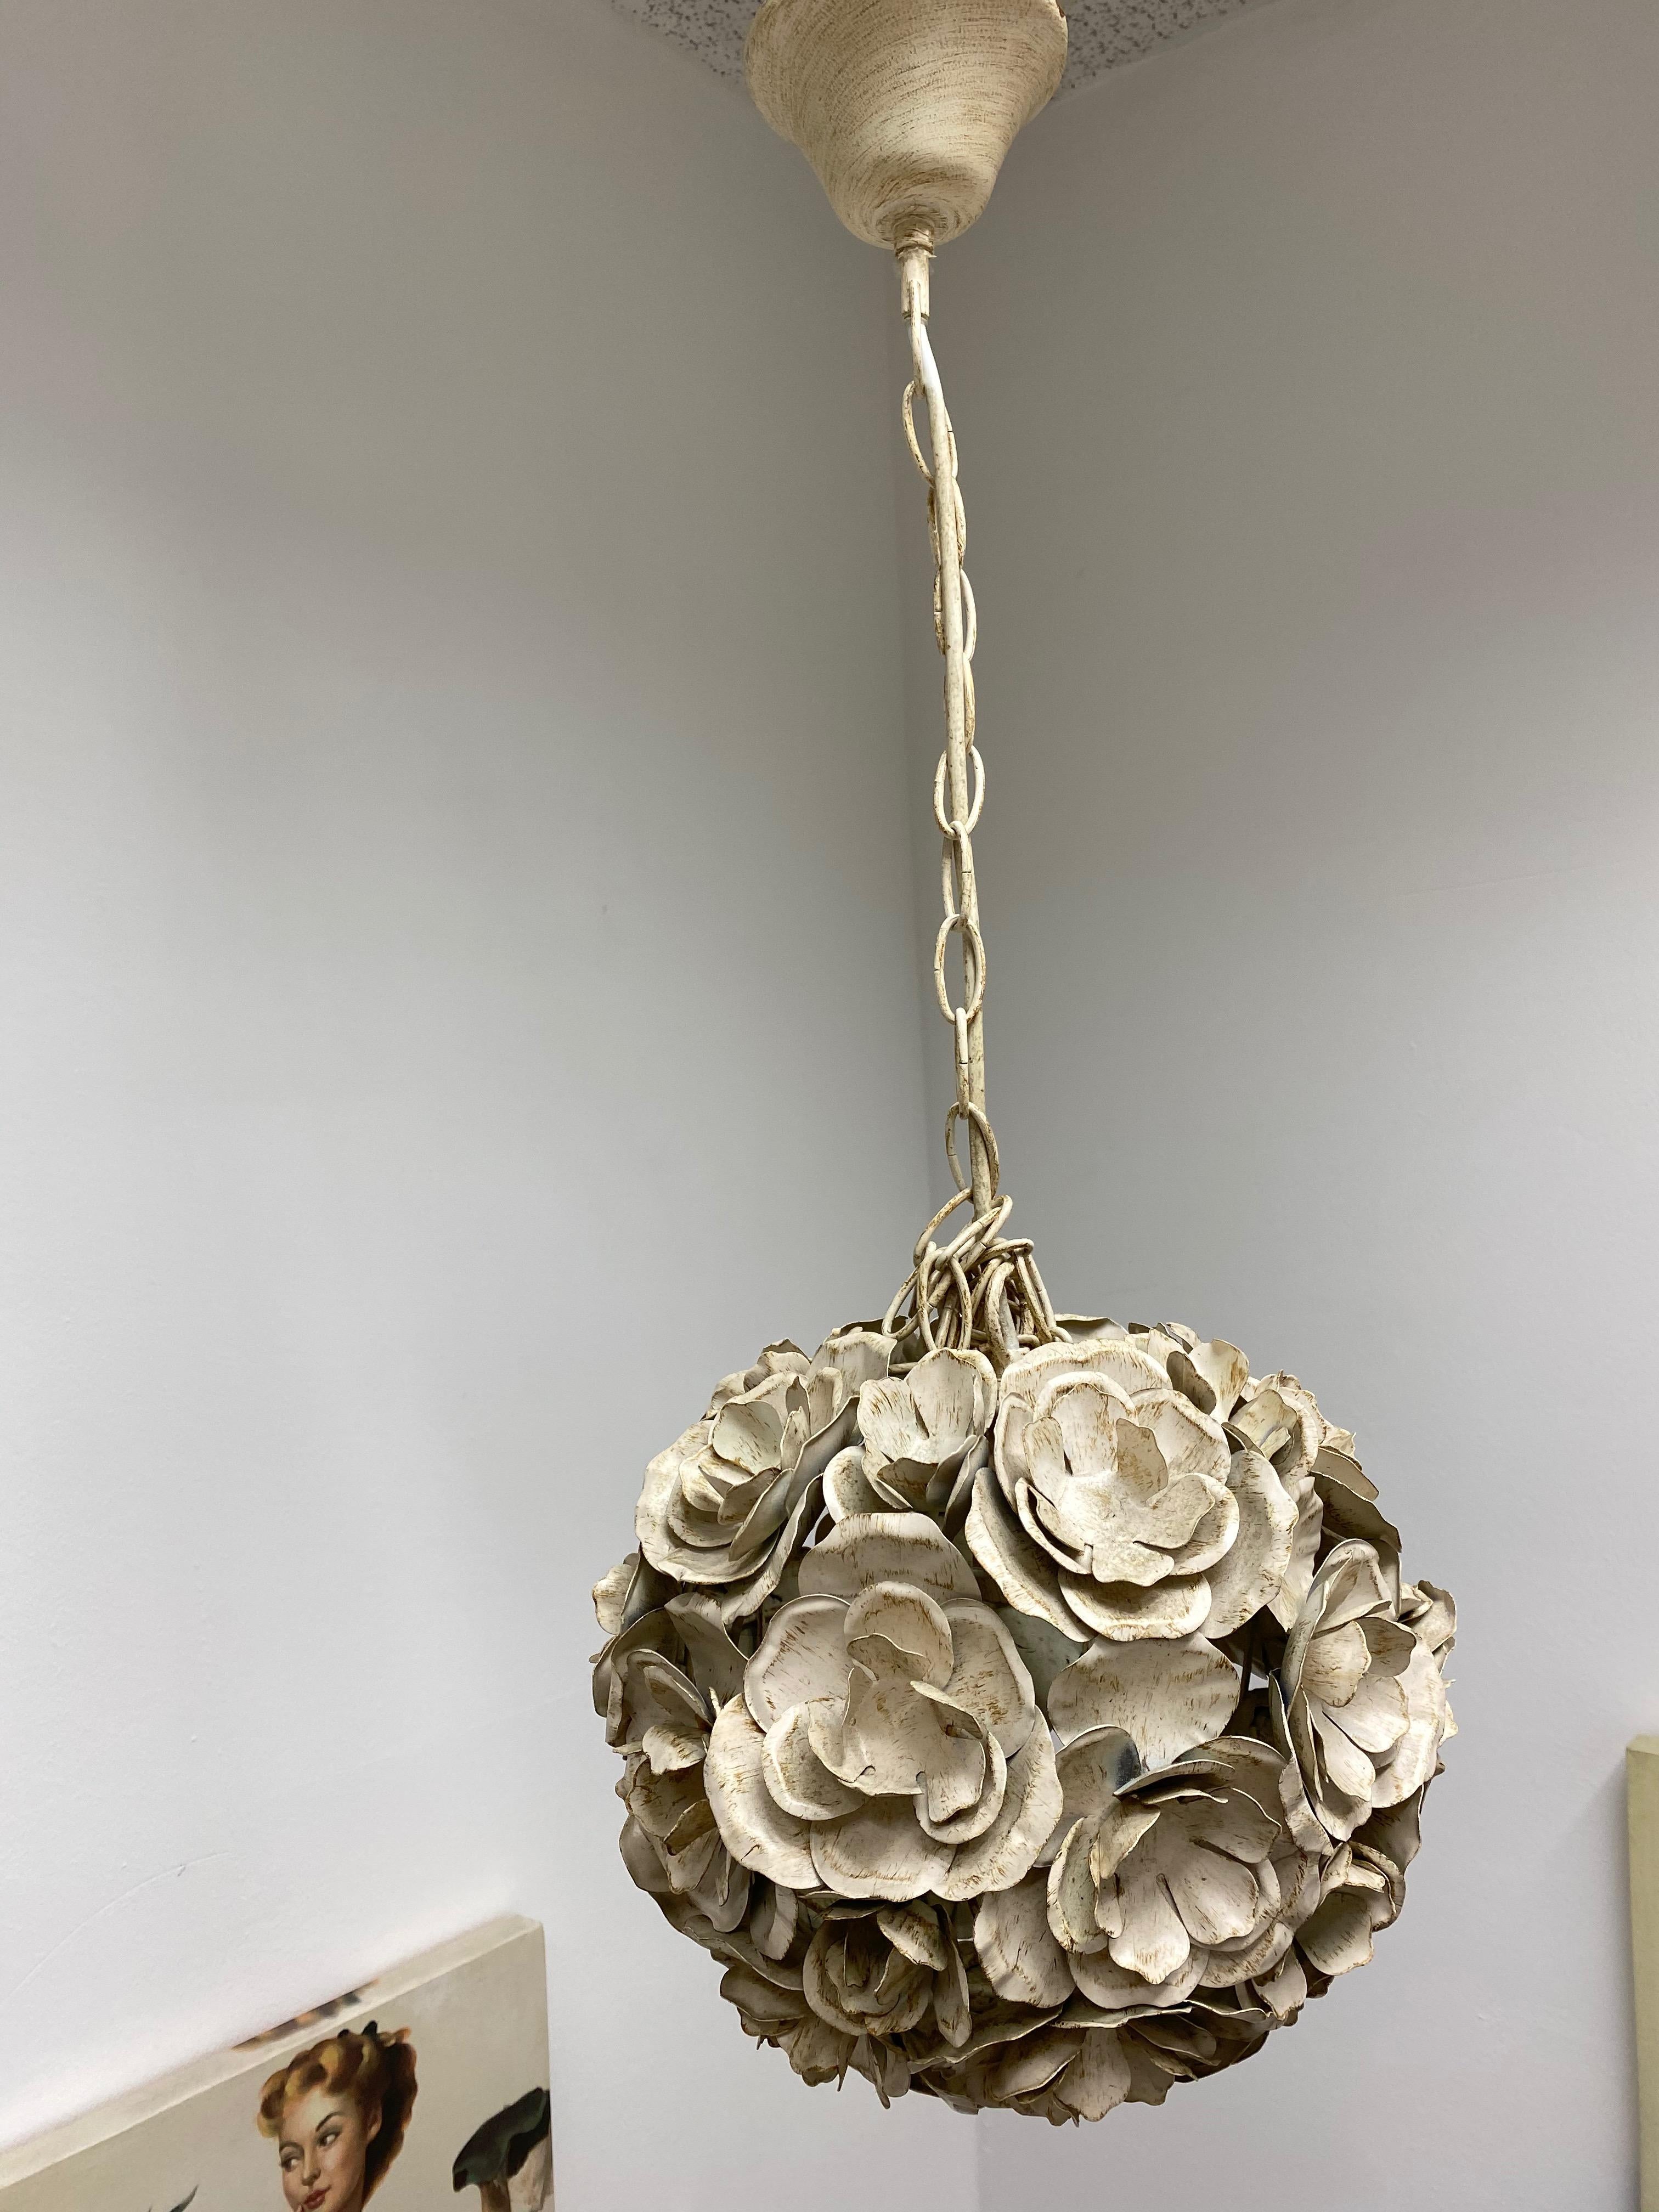 Add a touch of opulence to your home with this charming chandelier! Flowers in the style of a ball, to enhance any chic or eclectic home. We'd love to see it hanging in an entryway as a charming welcome home. The Fixture requires an European E14 /